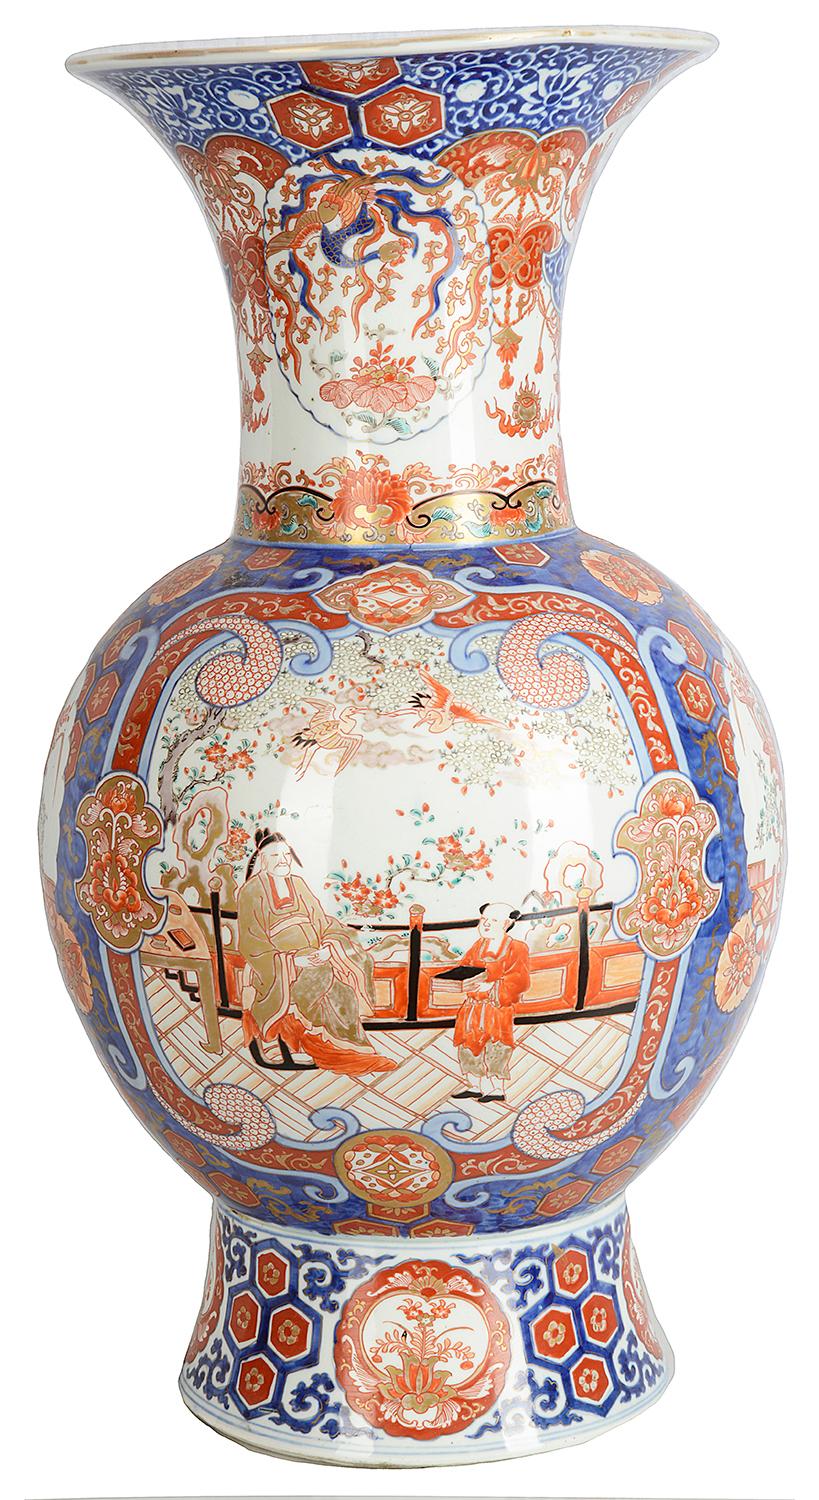 A very good quality late 19th century Japanese Imari vase, having a wonderful flared neck, orange and blue ground, classical motif decoration to the whole, inset panels depicting oriental scenes of people sitting on a veranda in a garden setting